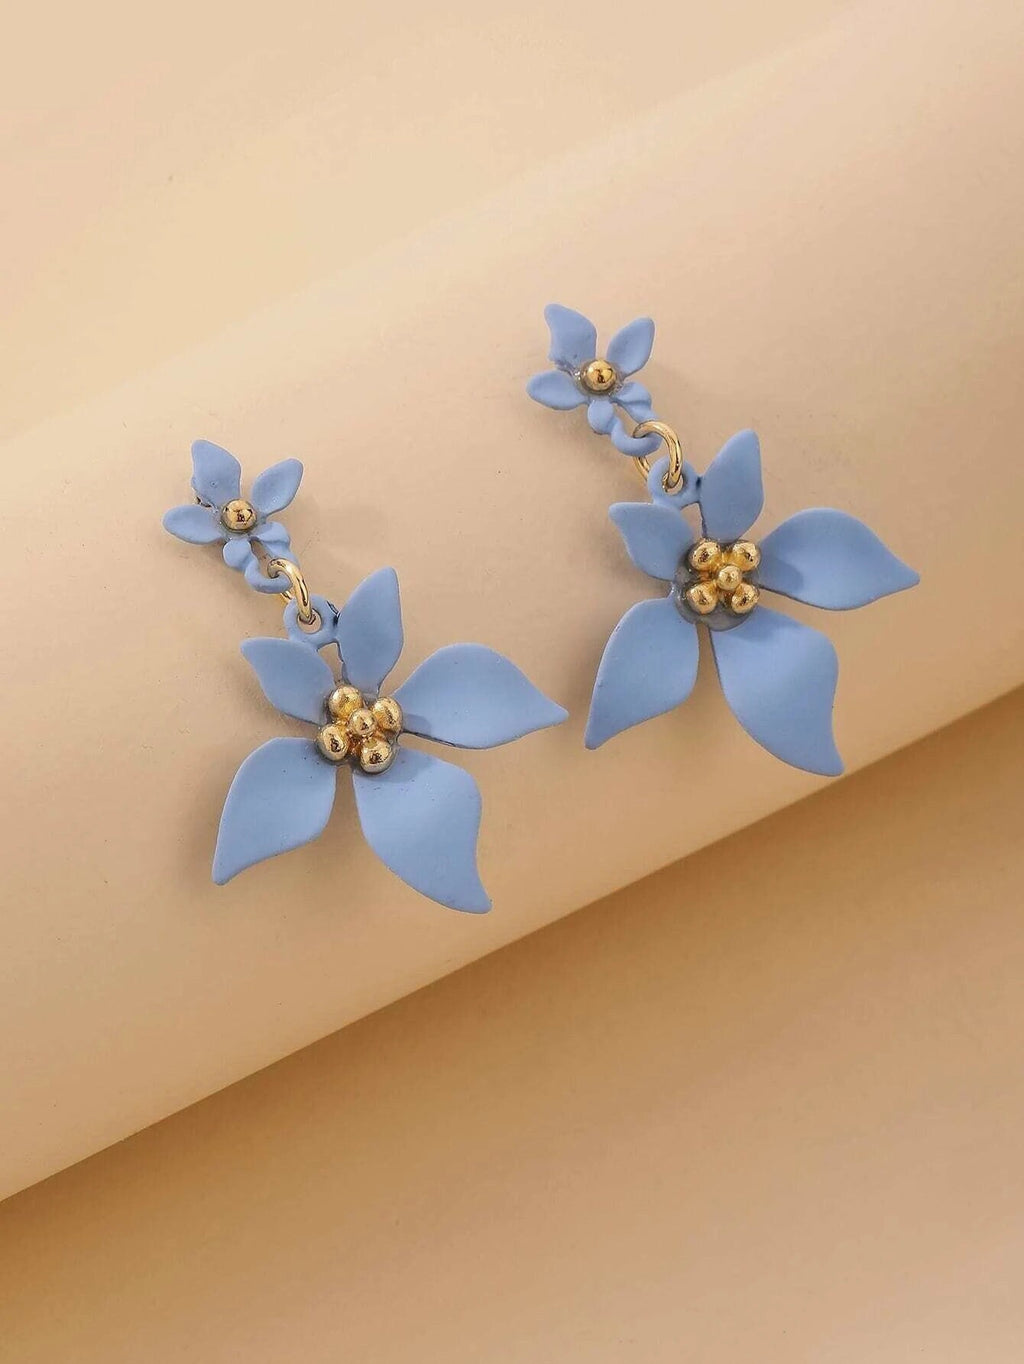 S925 Sterling Silver Post Double Flower Earrings, Lightweight Statement Blue Pink or Yellow Floral Prom Stud Earrings - KaleaBoutique.com